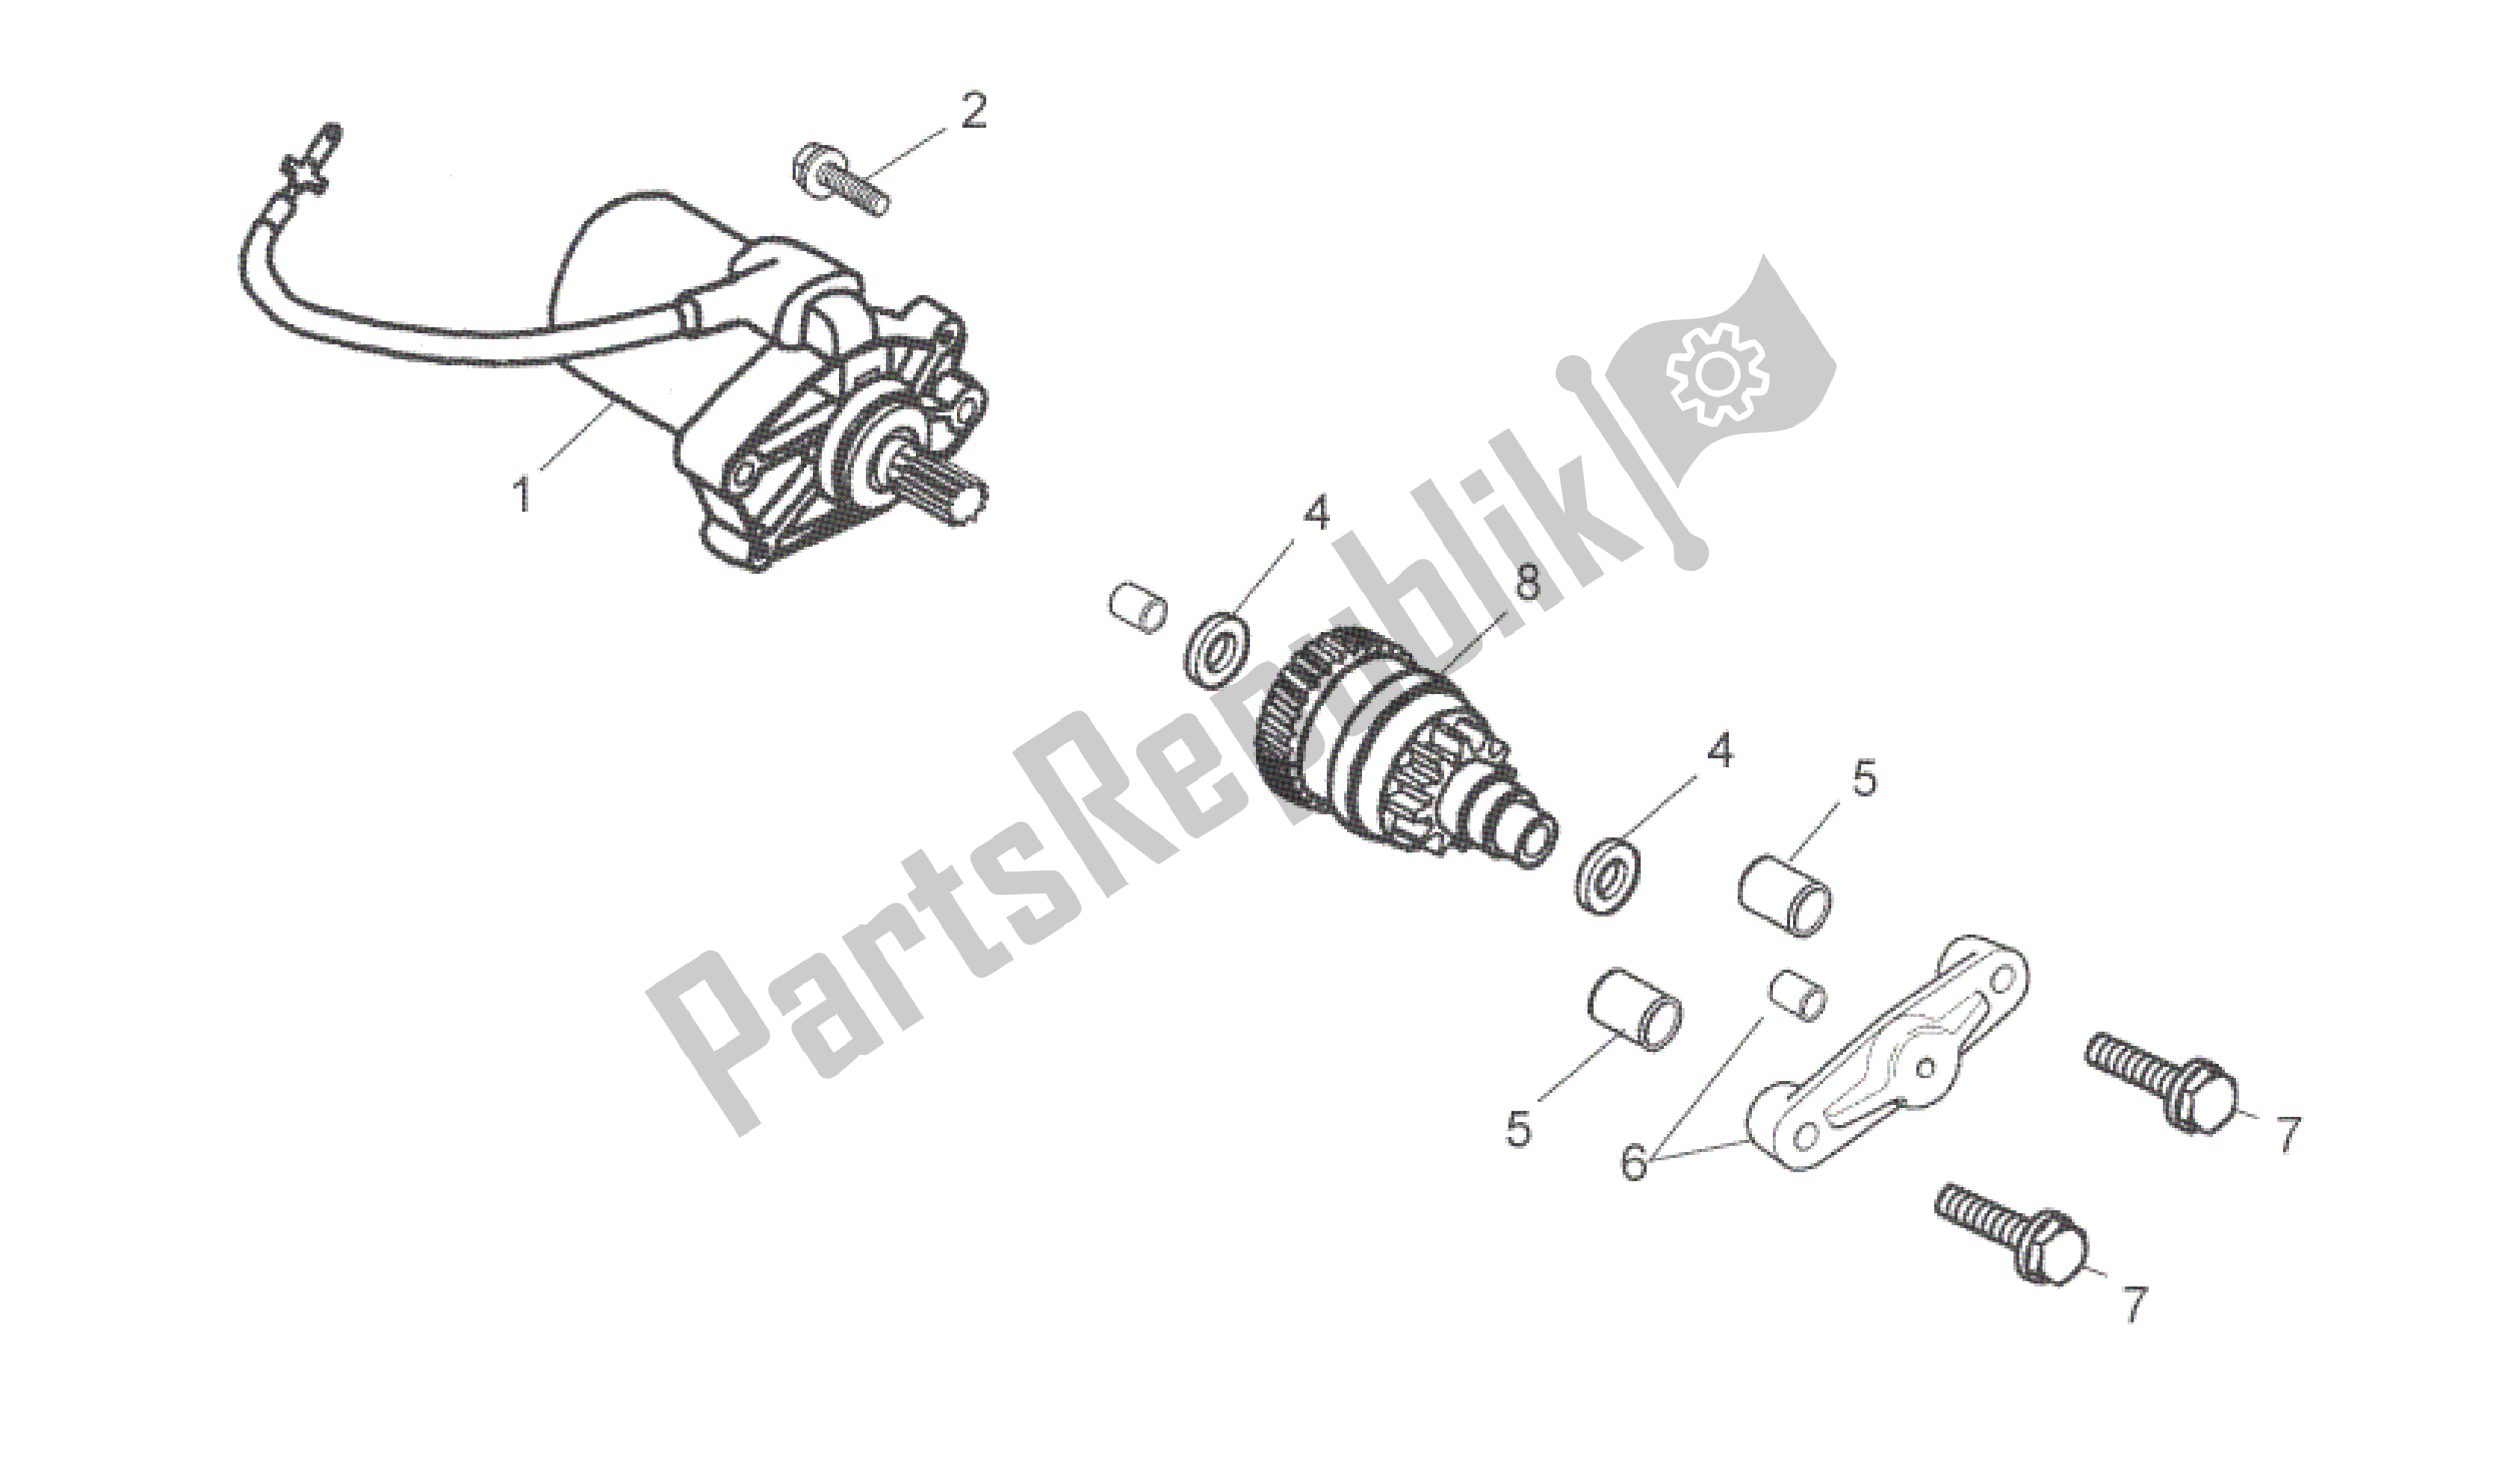 All parts for the Starter Motor of the Aprilia RS 50 2006 - 2010